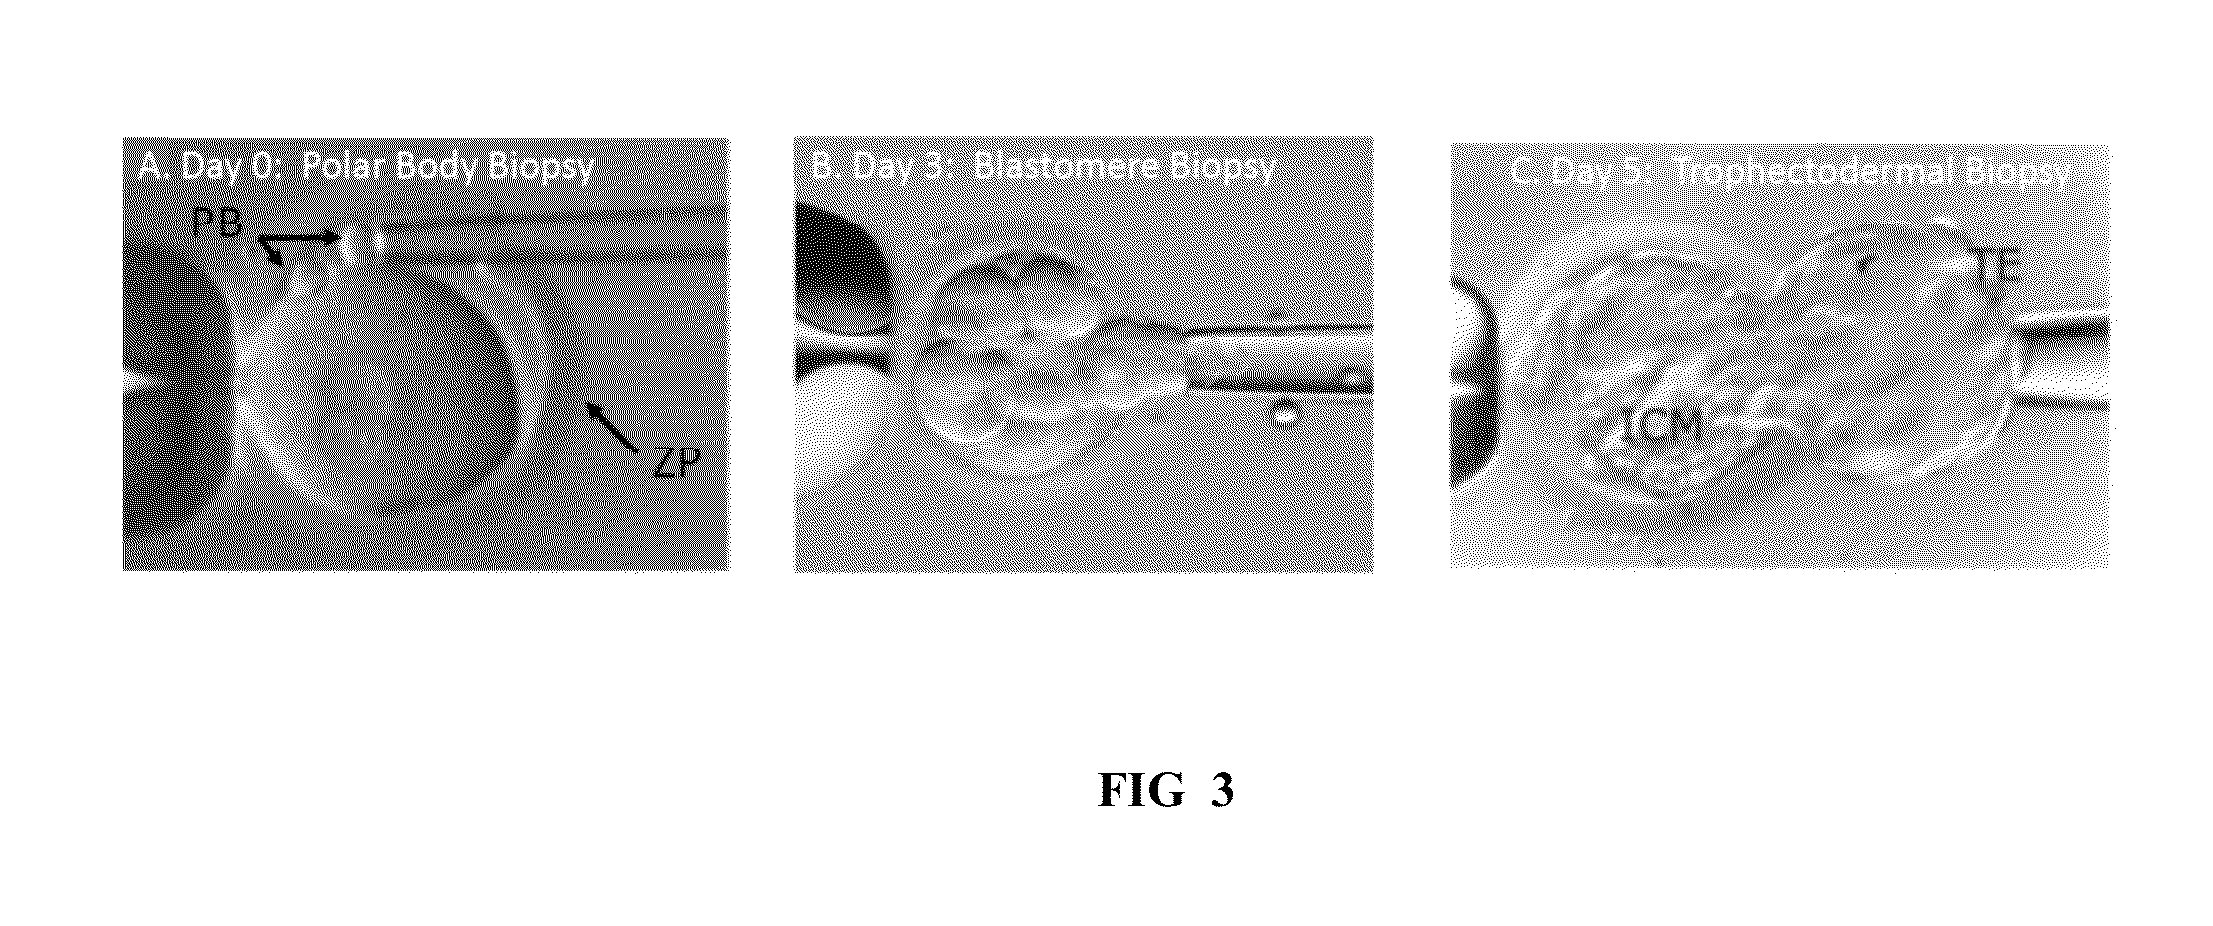 Compositions and methods for genetic analysis of embryos